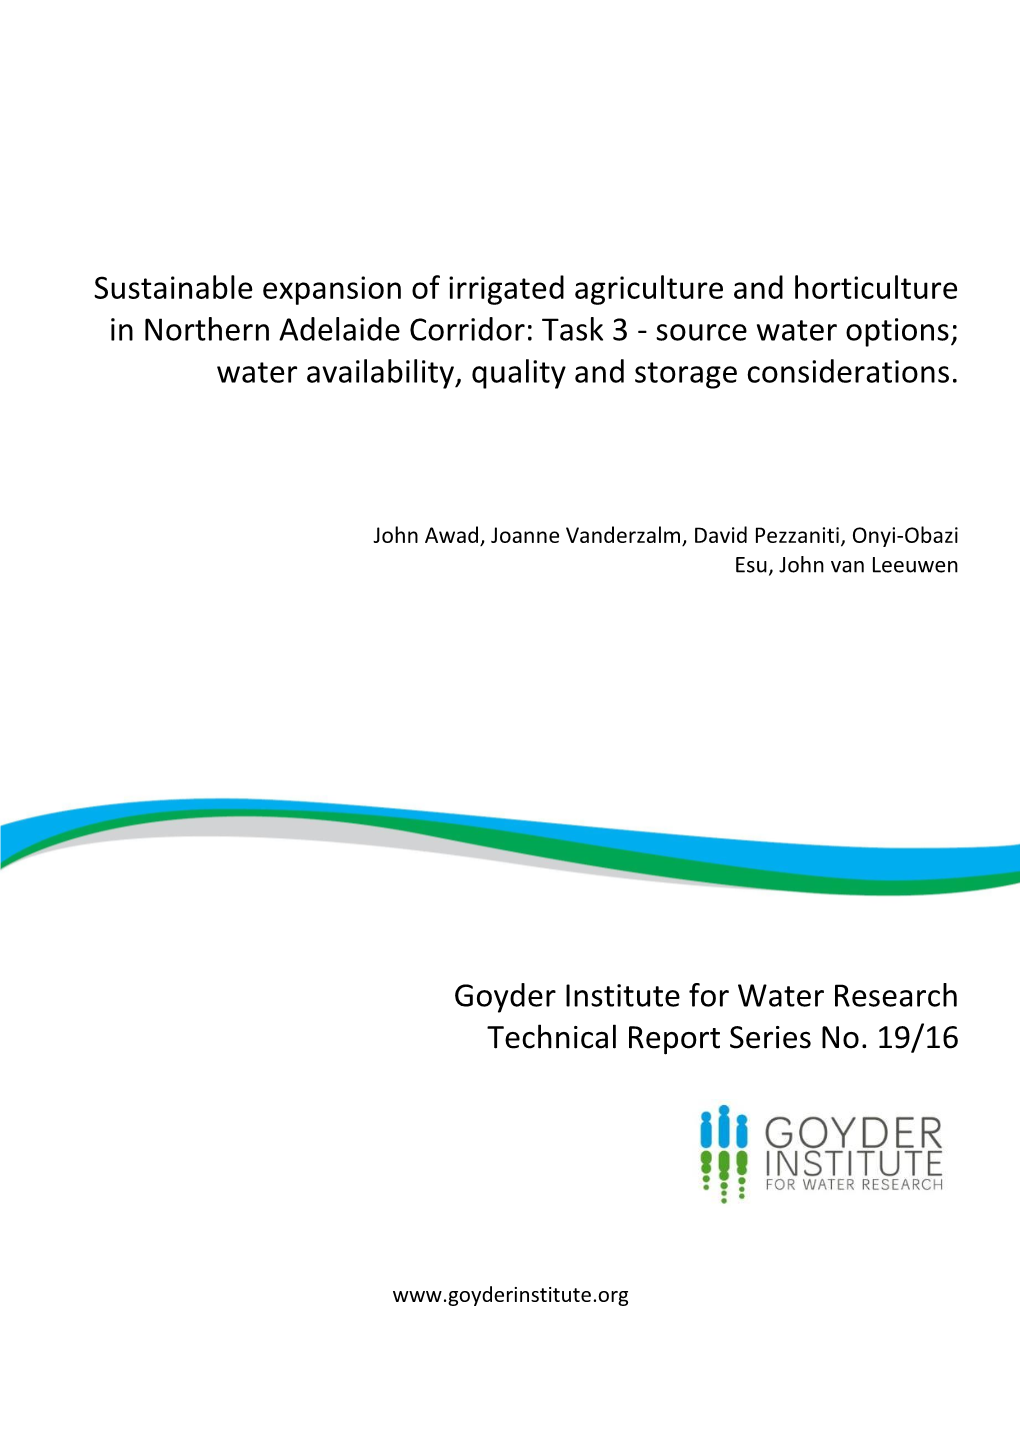 Sustainable Expansion of Irrigated Agriculture and Horticulture In